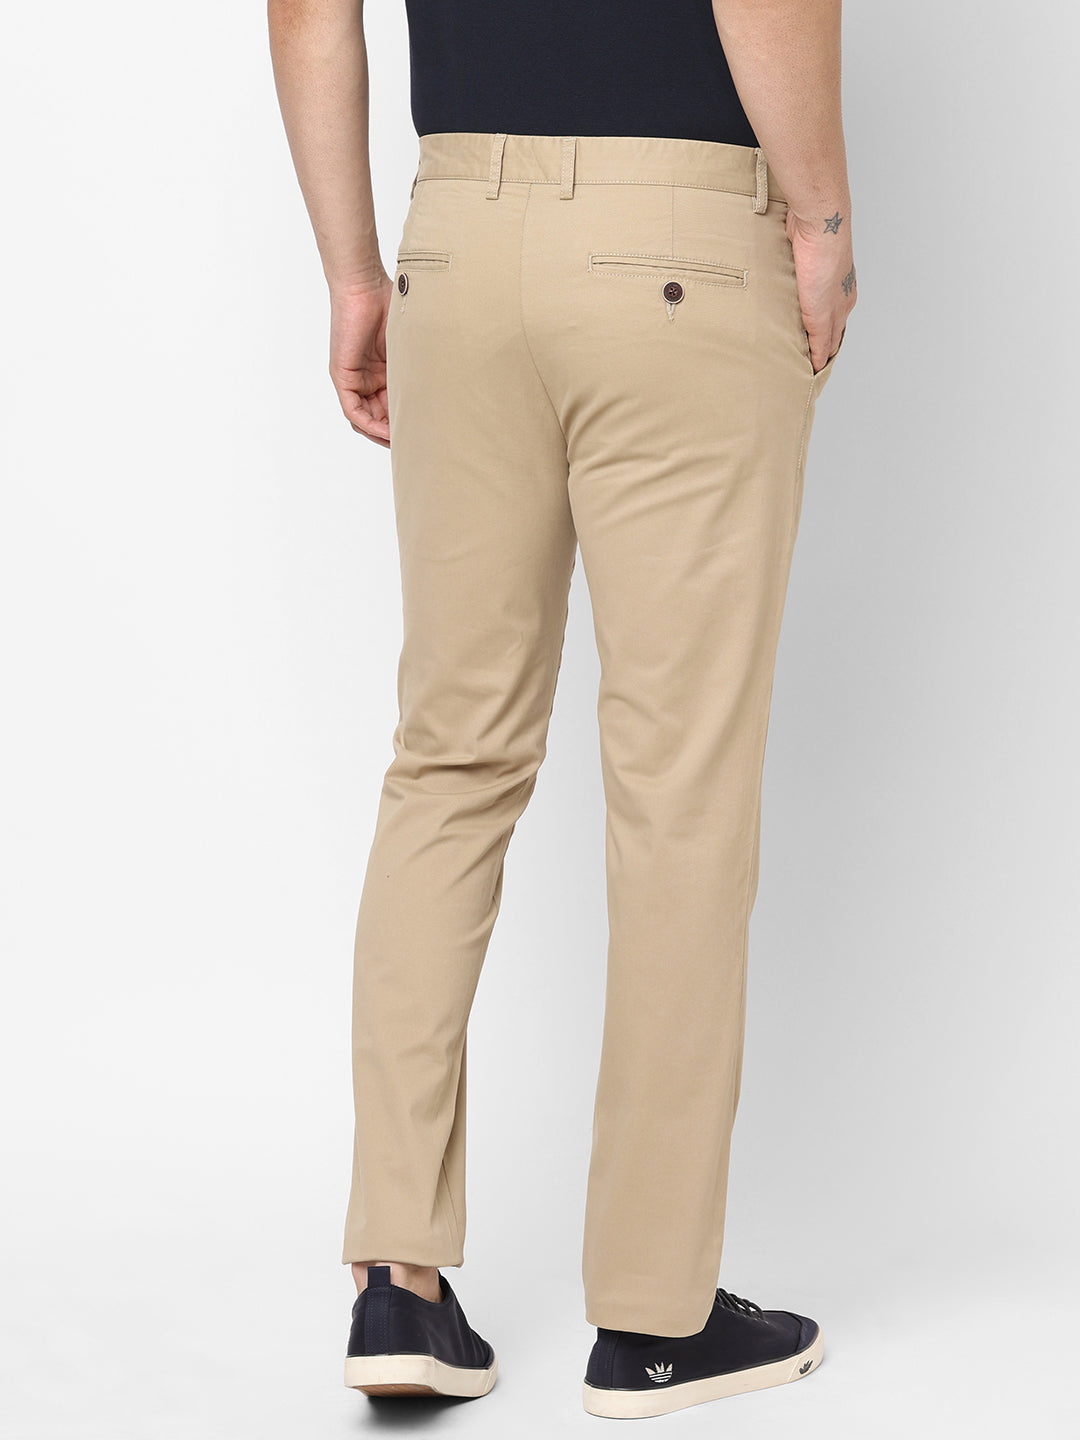 Buy Black and Beige Combo of 2 Four Pocket Cargo Pants Pure Cotton for Best  Price Reviews Free Shipping